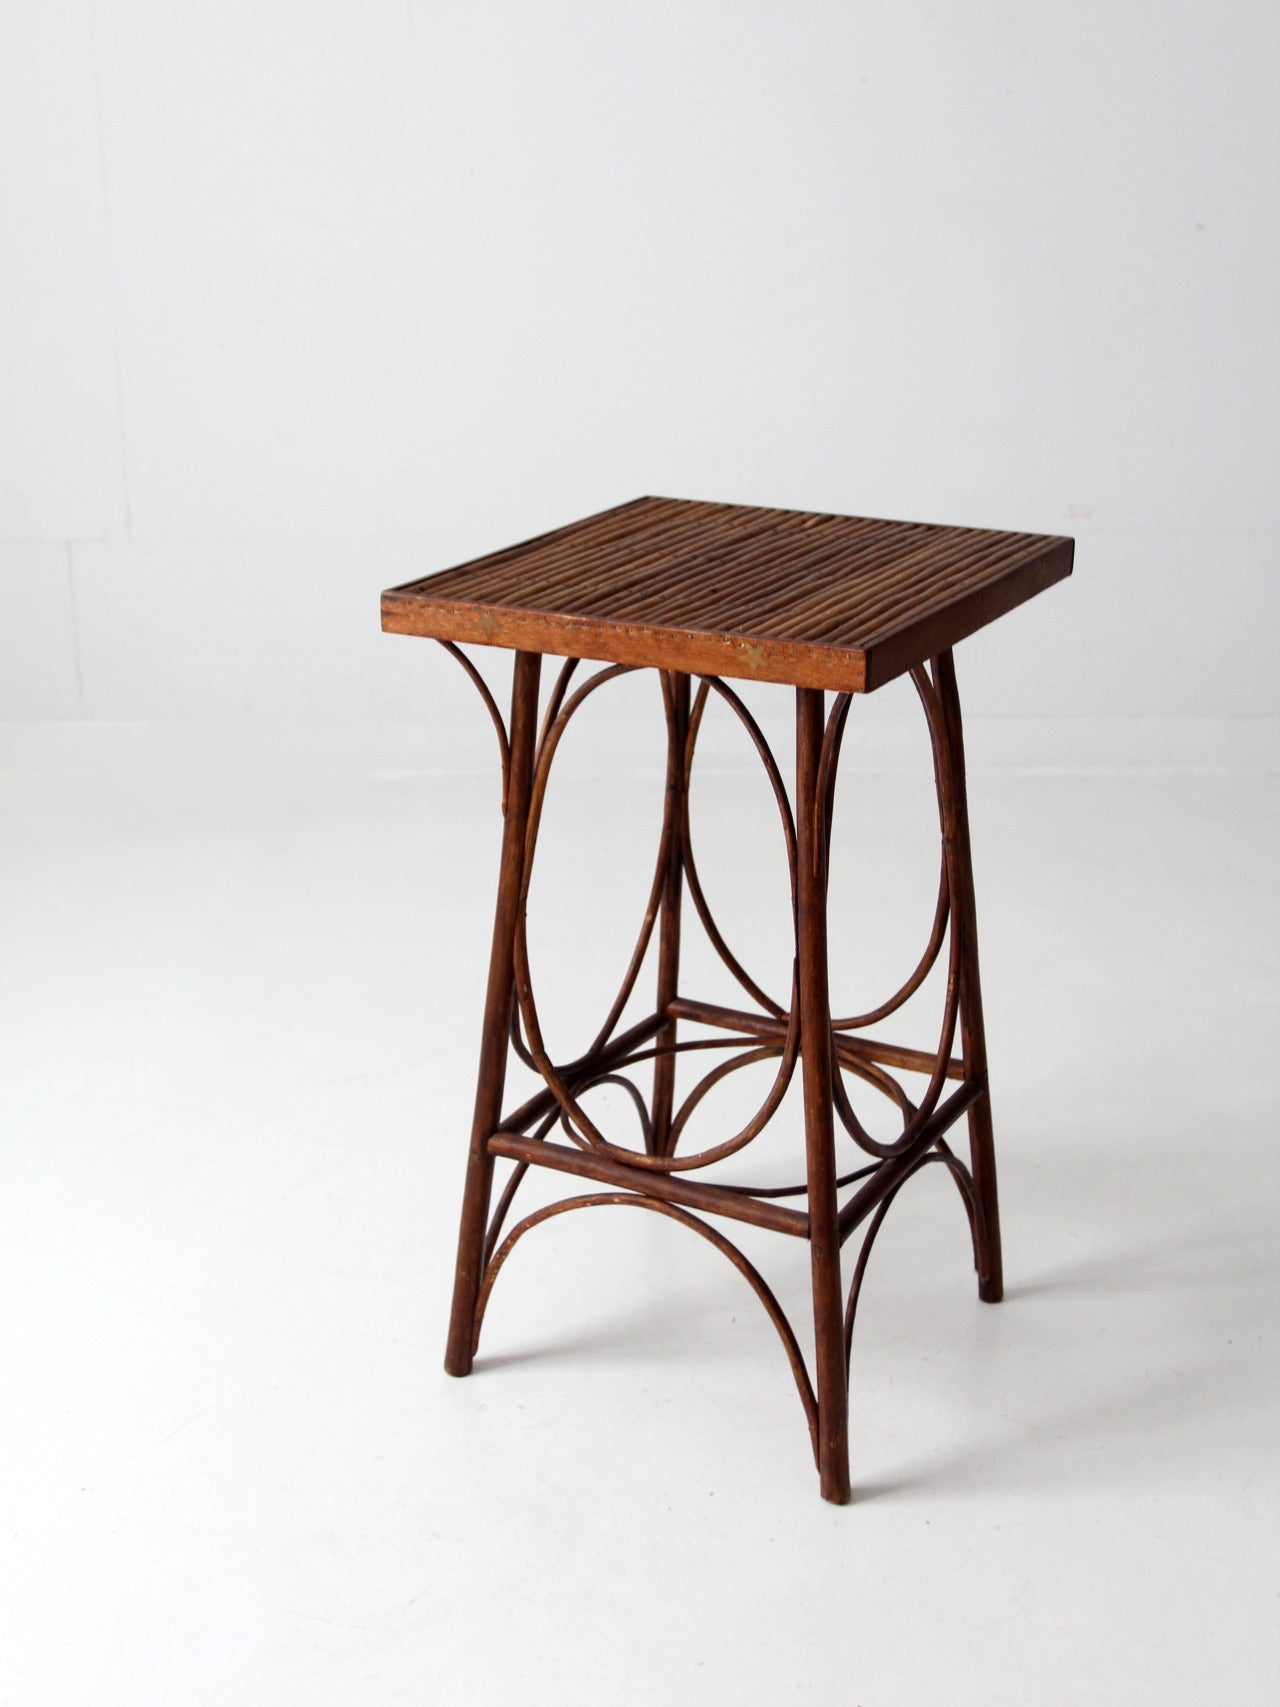 antique rustic side table